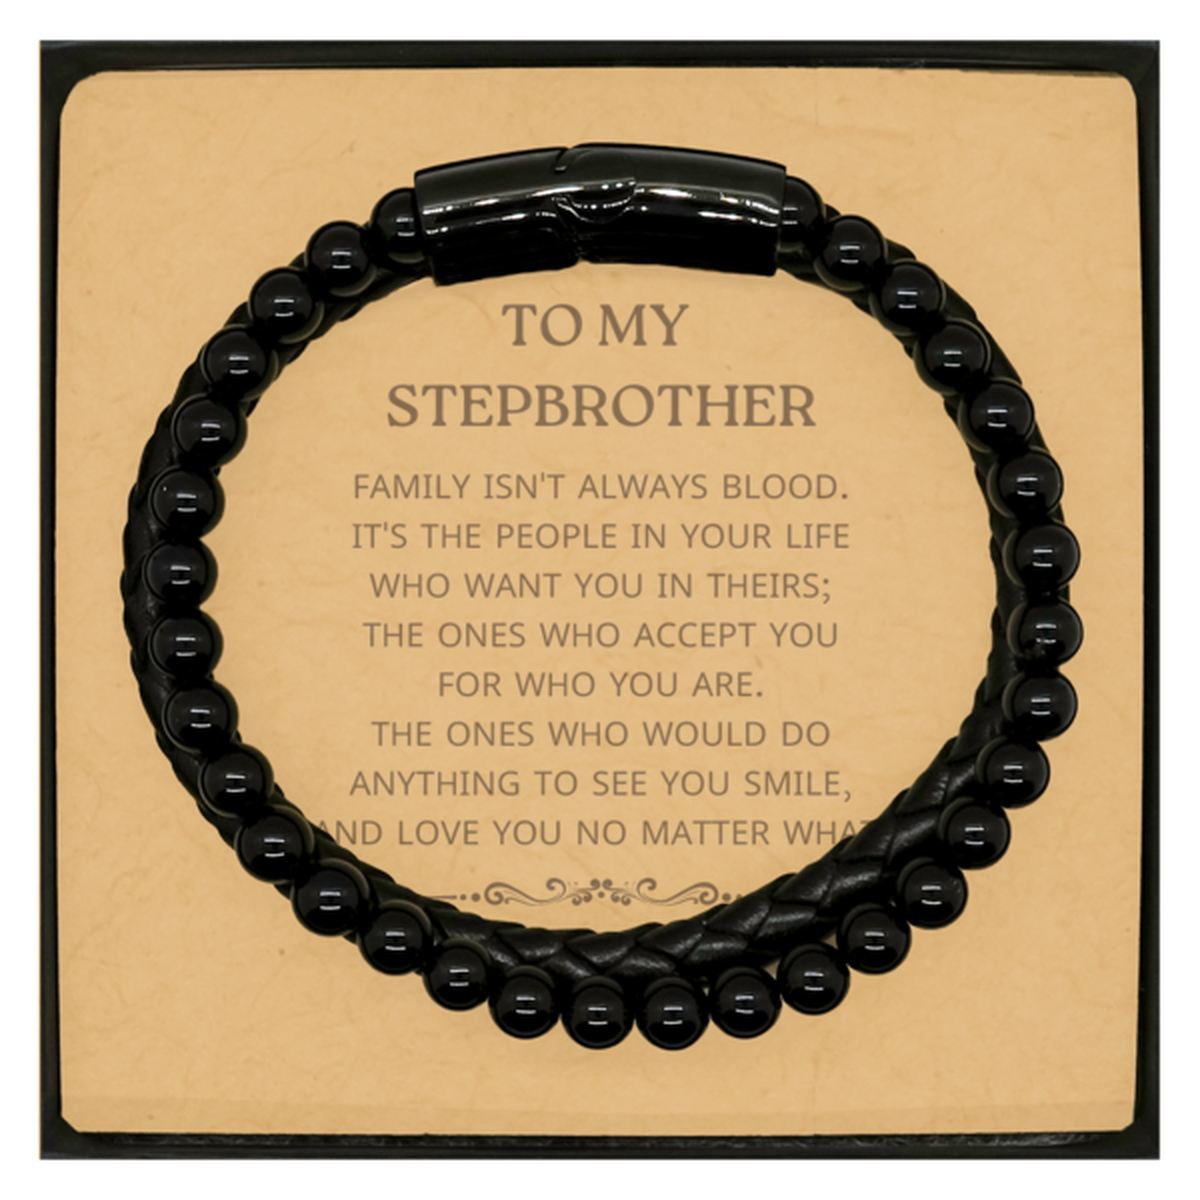 To My Stepbrother Gifts, Family isn't always blood, Stepbrother Stone Leather Bracelets, Birthday Christmas Unique Present For Stepbrother